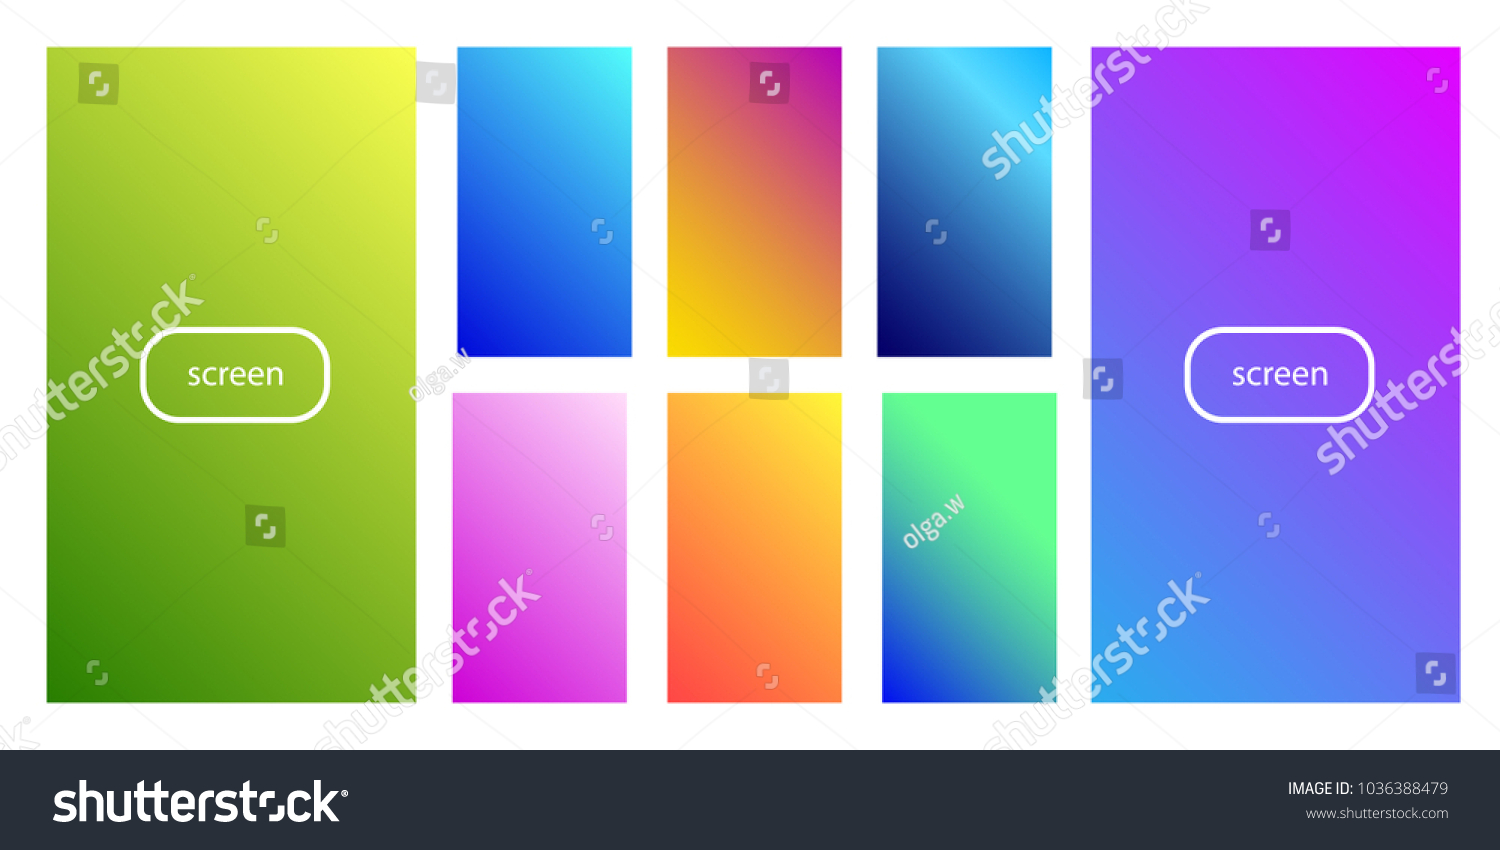 Soft Color Background Soft Color Gradients Stock Vector (Royalty Free ...